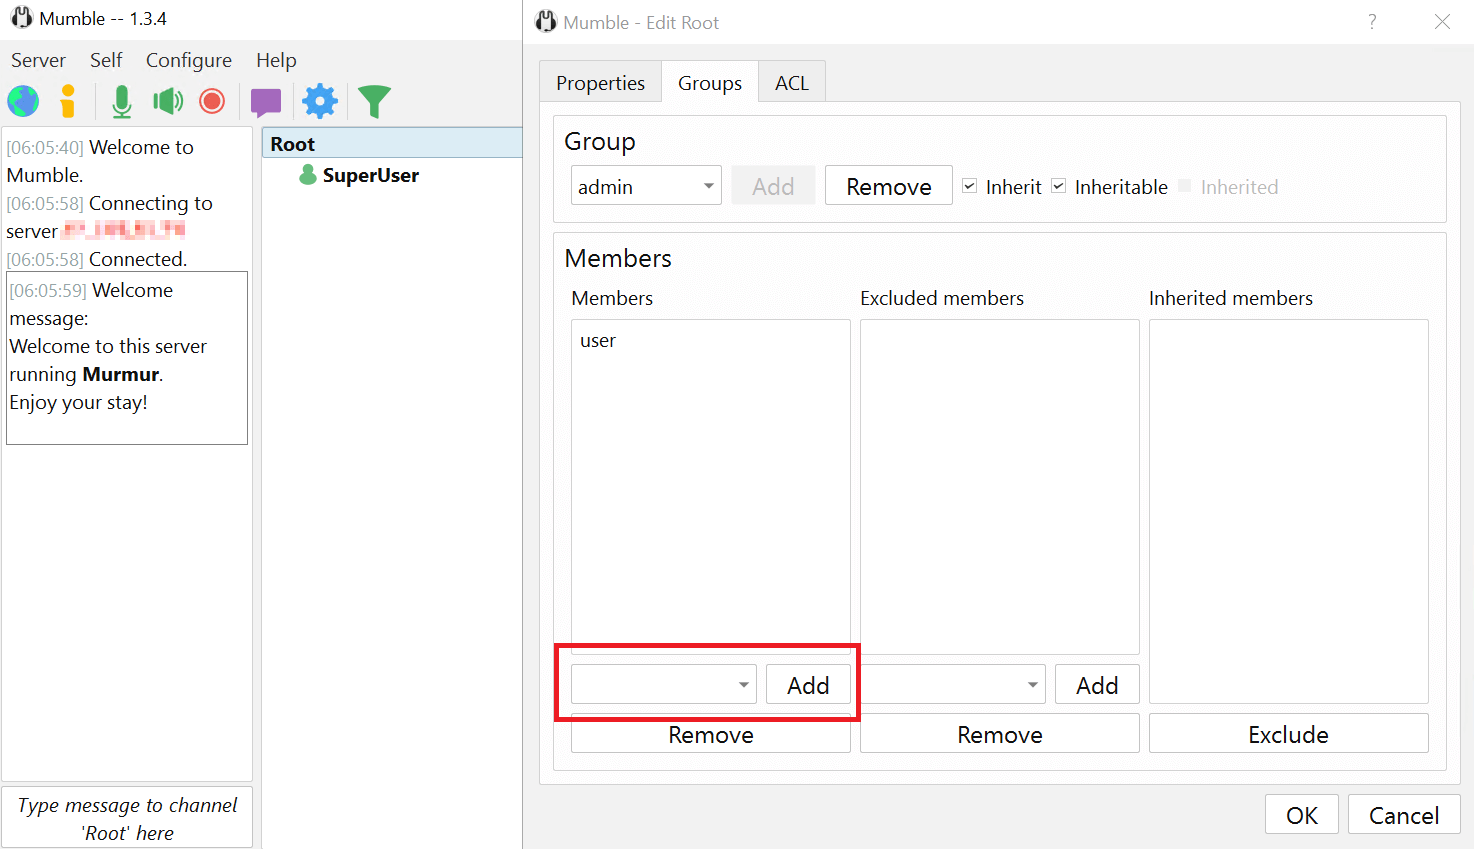 Group management in Mumble